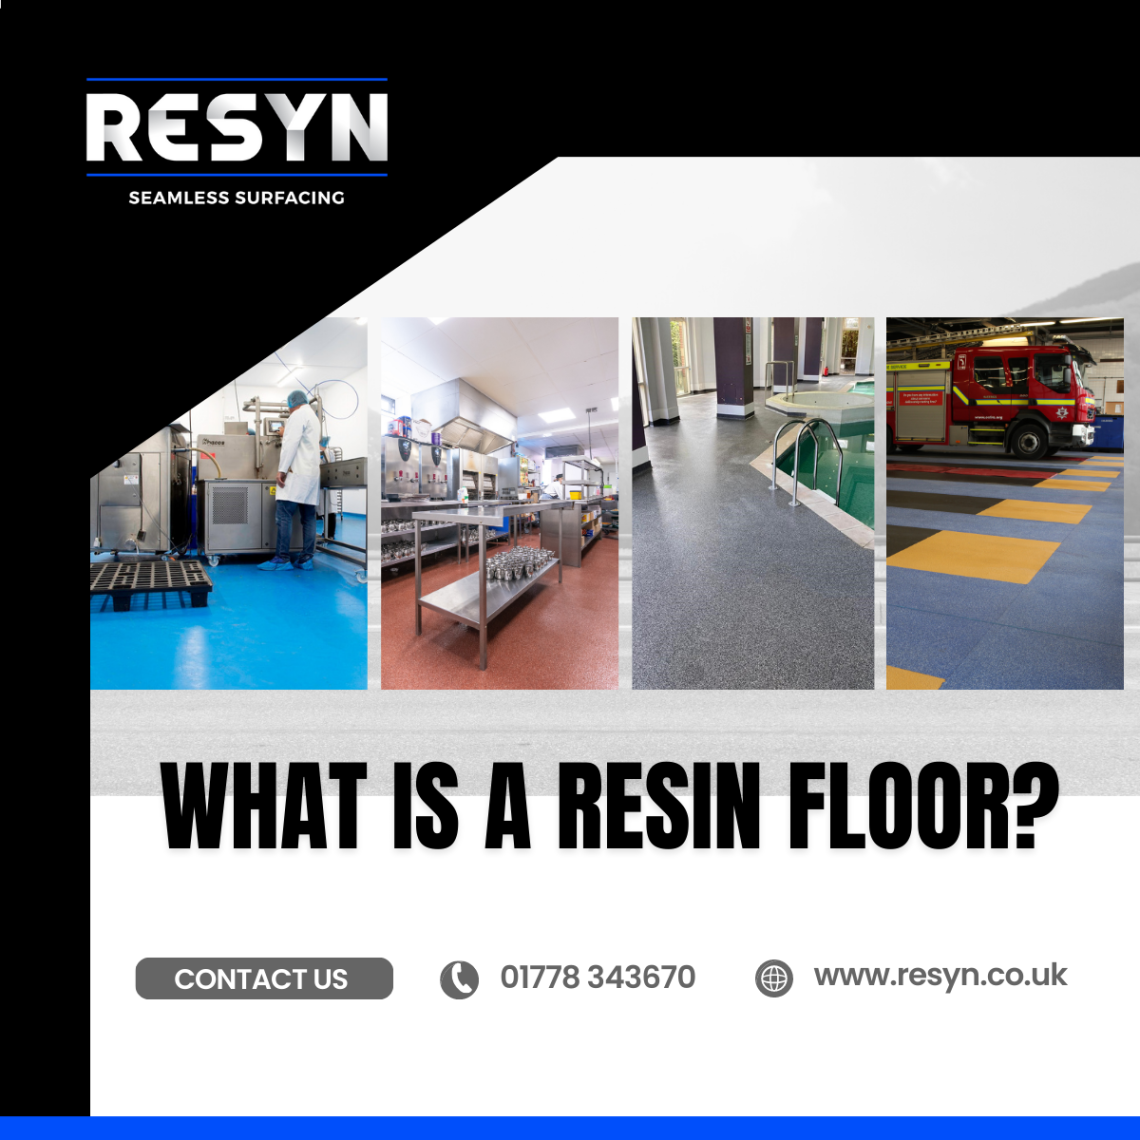 What is a resin floor RSYN with seamless surfacing explains